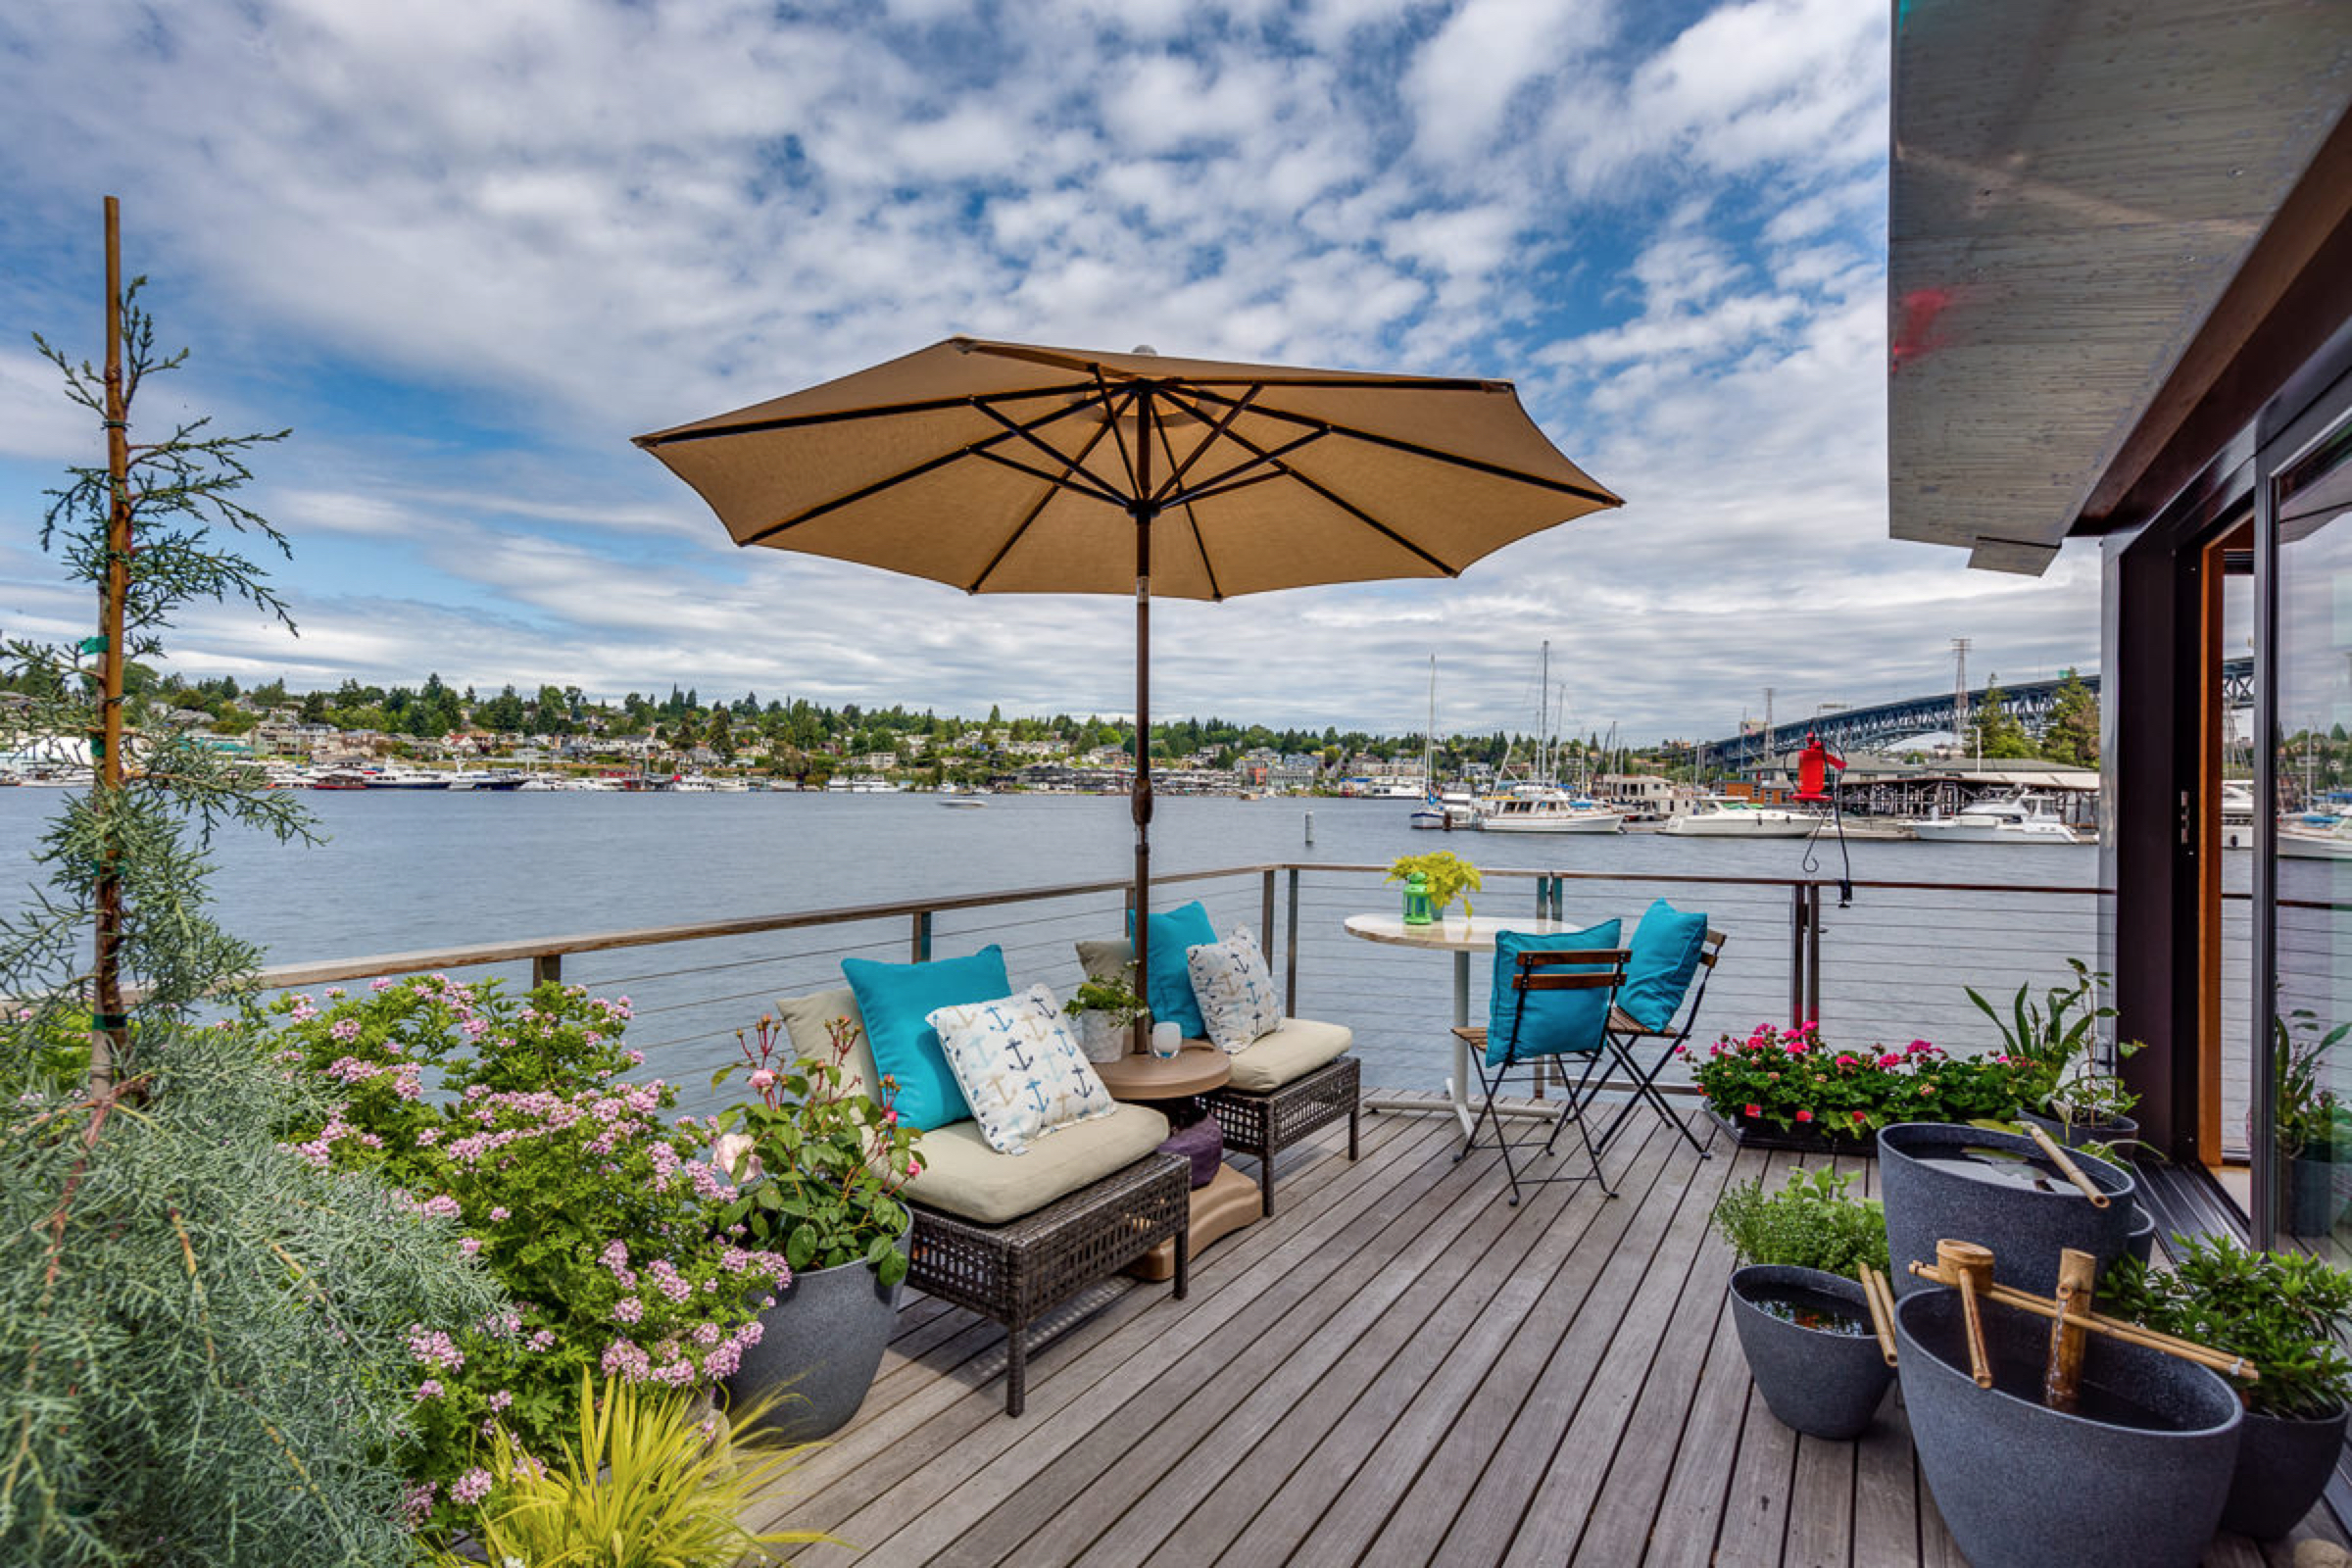 Seattle Floating Homes, Ward's Cove #12, Living Room Deck